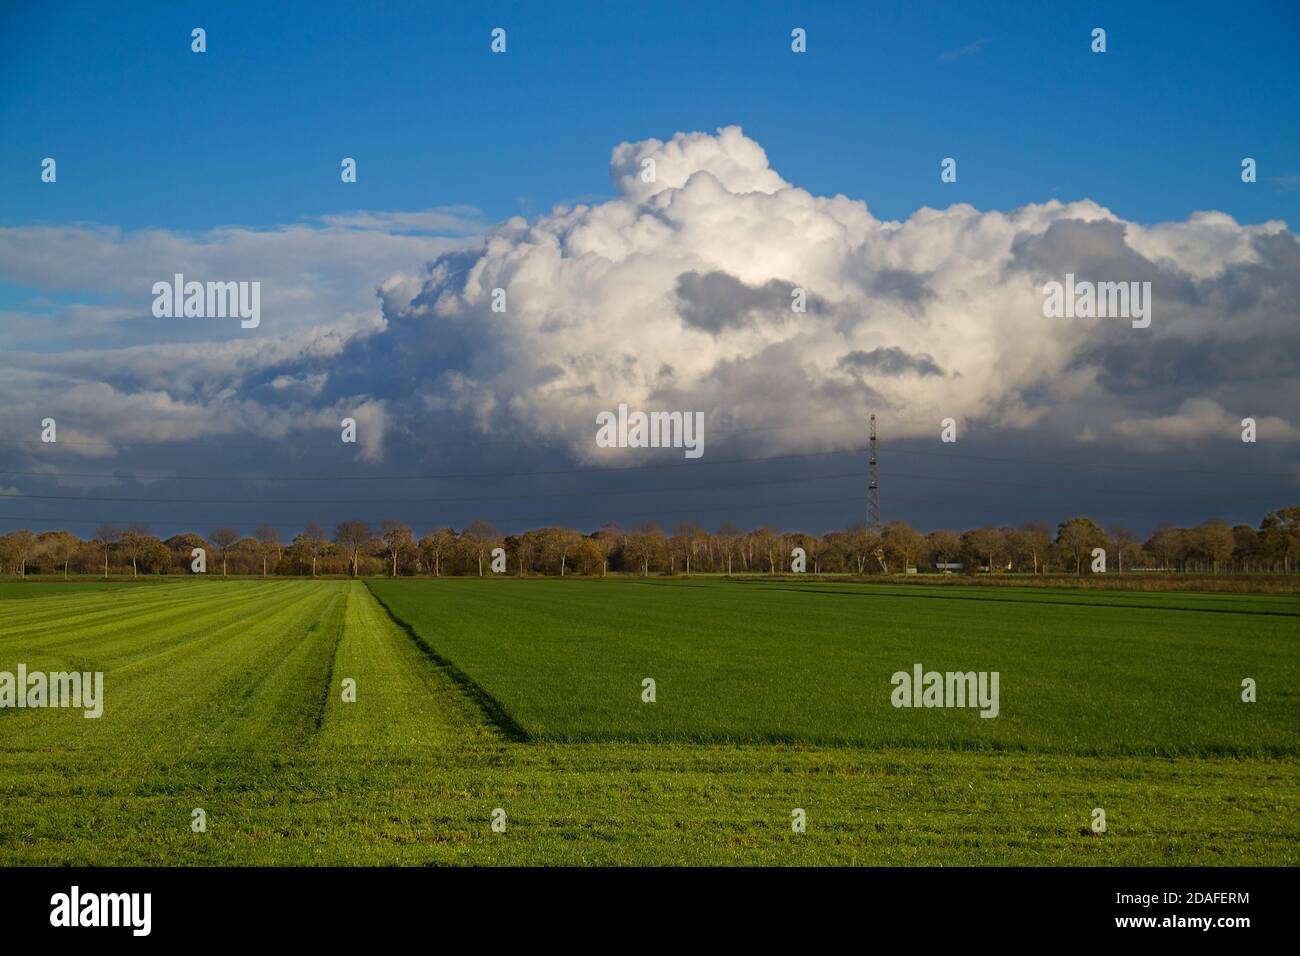 Weather front approaching over dull, modern, flat production landscape Stock Photo